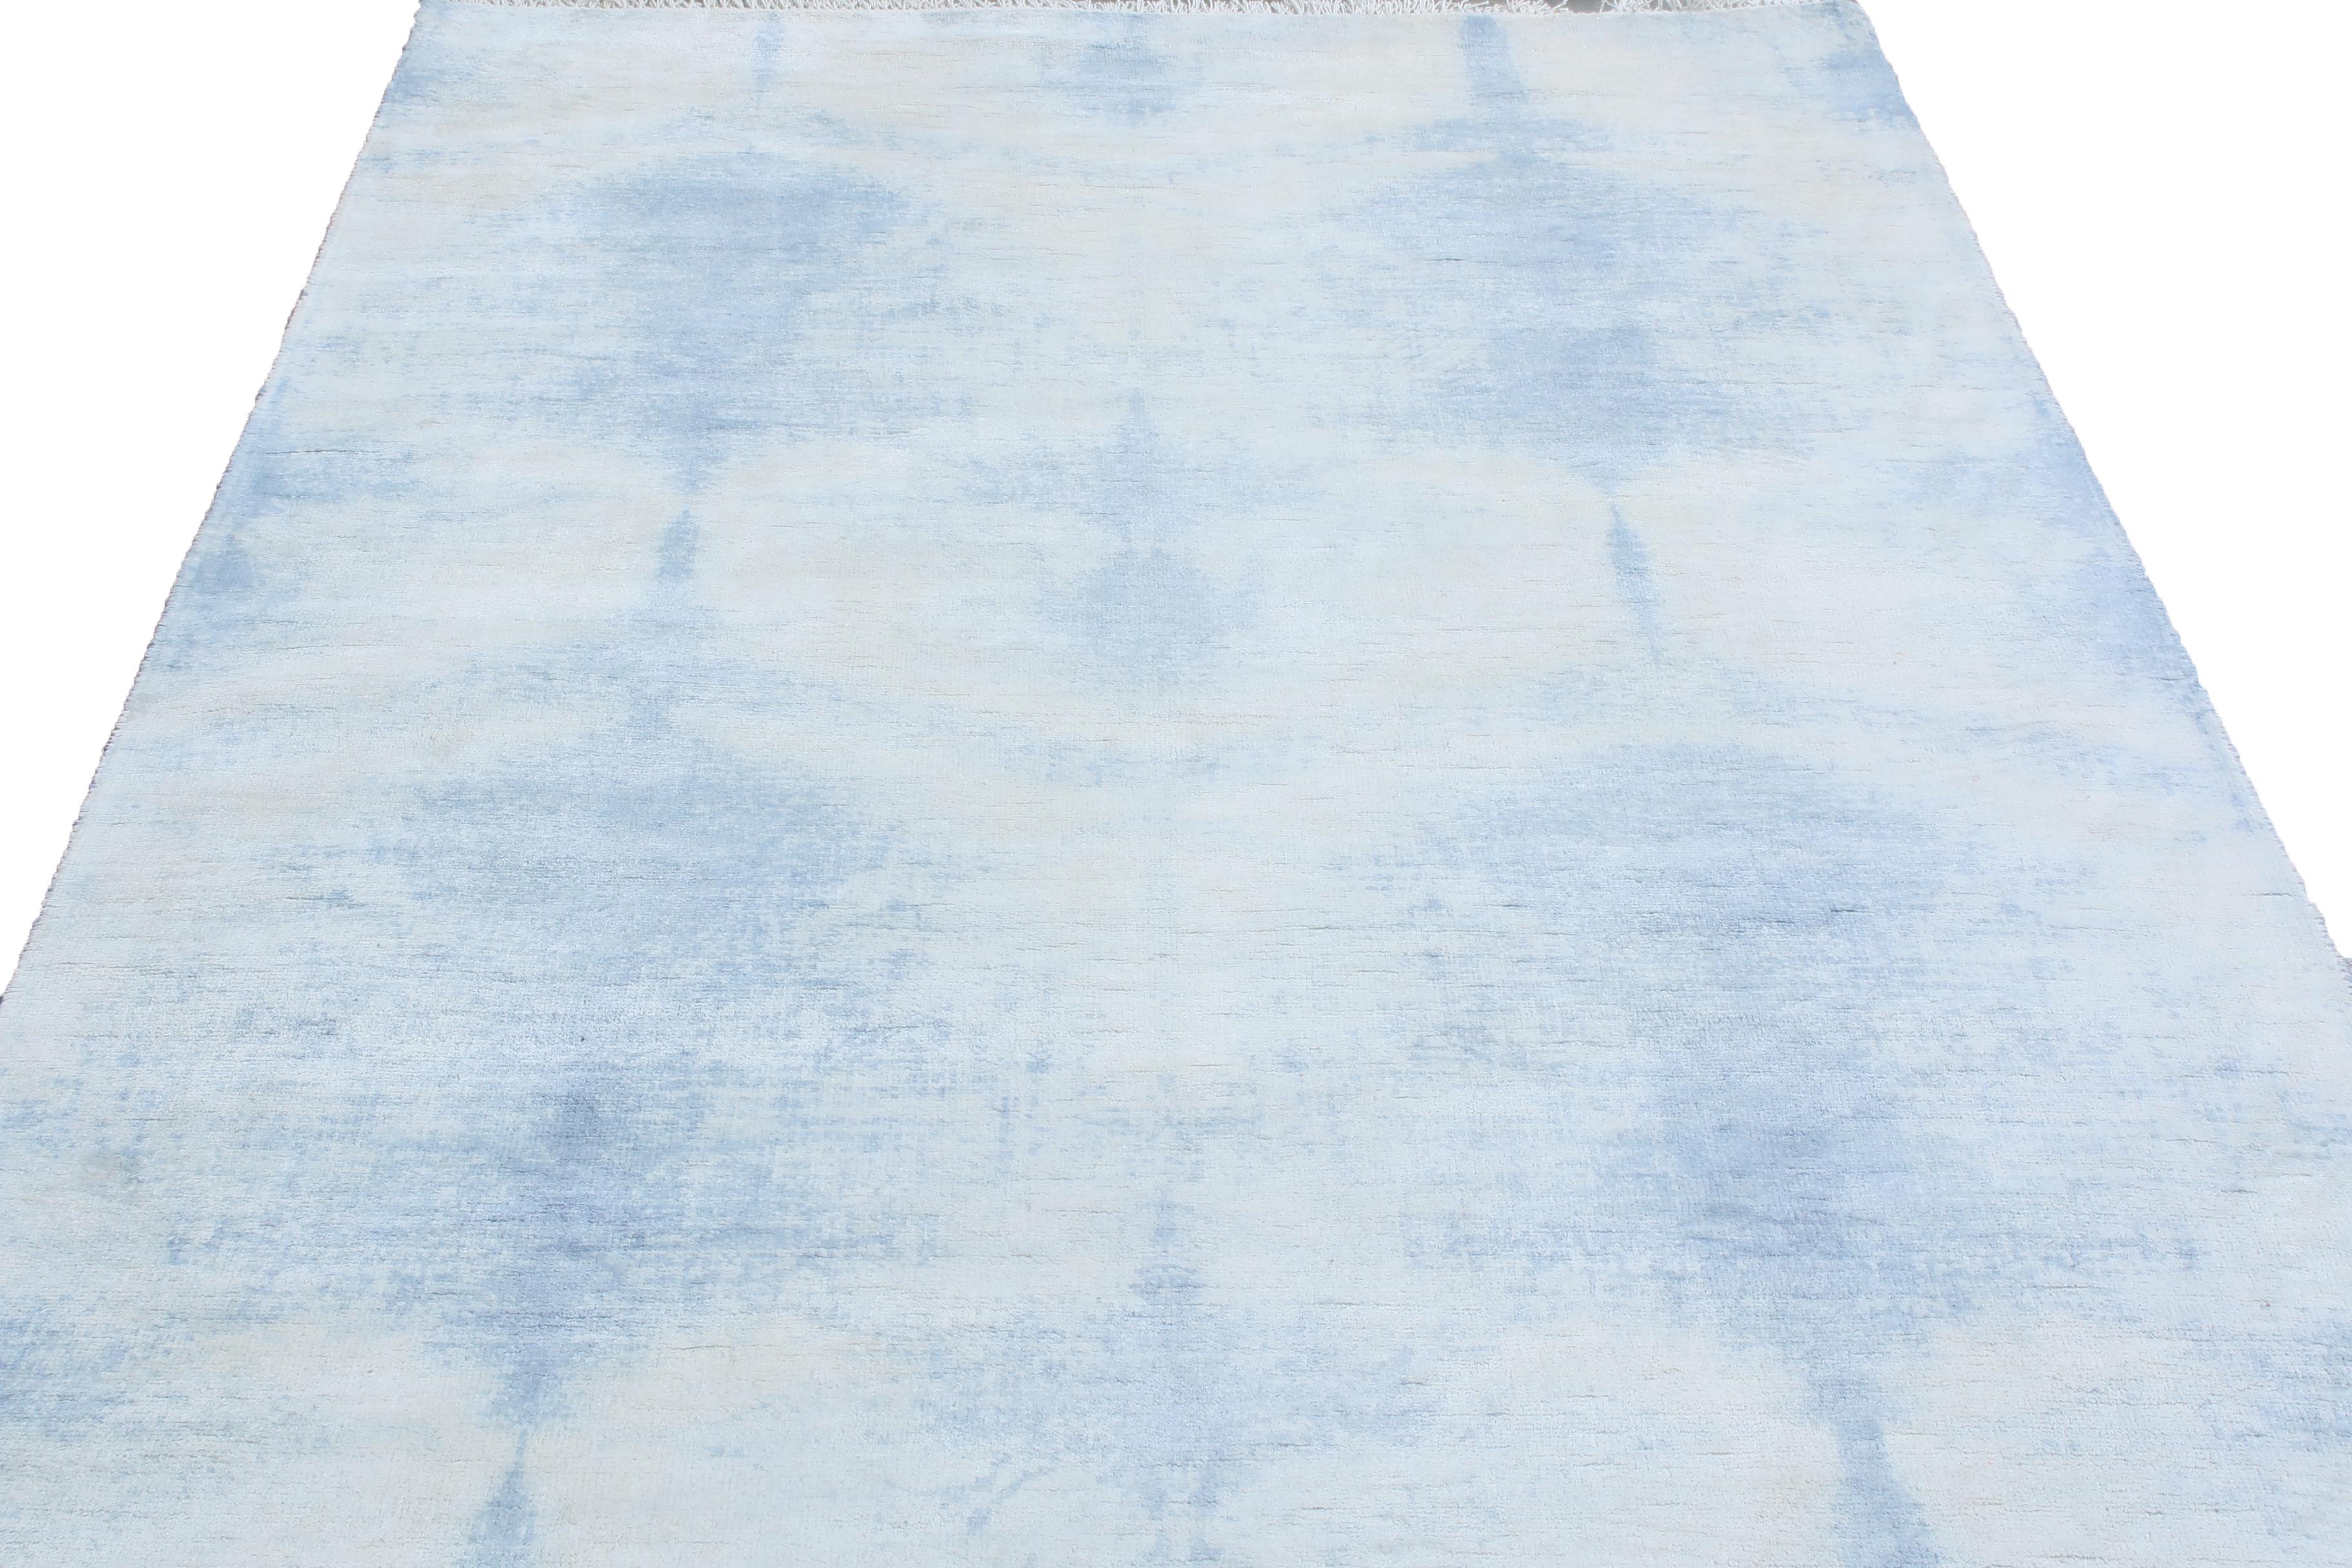 Hand knotted in 65 percent wool and 25 percent silk originating from India, this geometric runner enjoys a luminous, borderless geometric azure blue field design against a complementary ivory background, lending versatility and natural light under